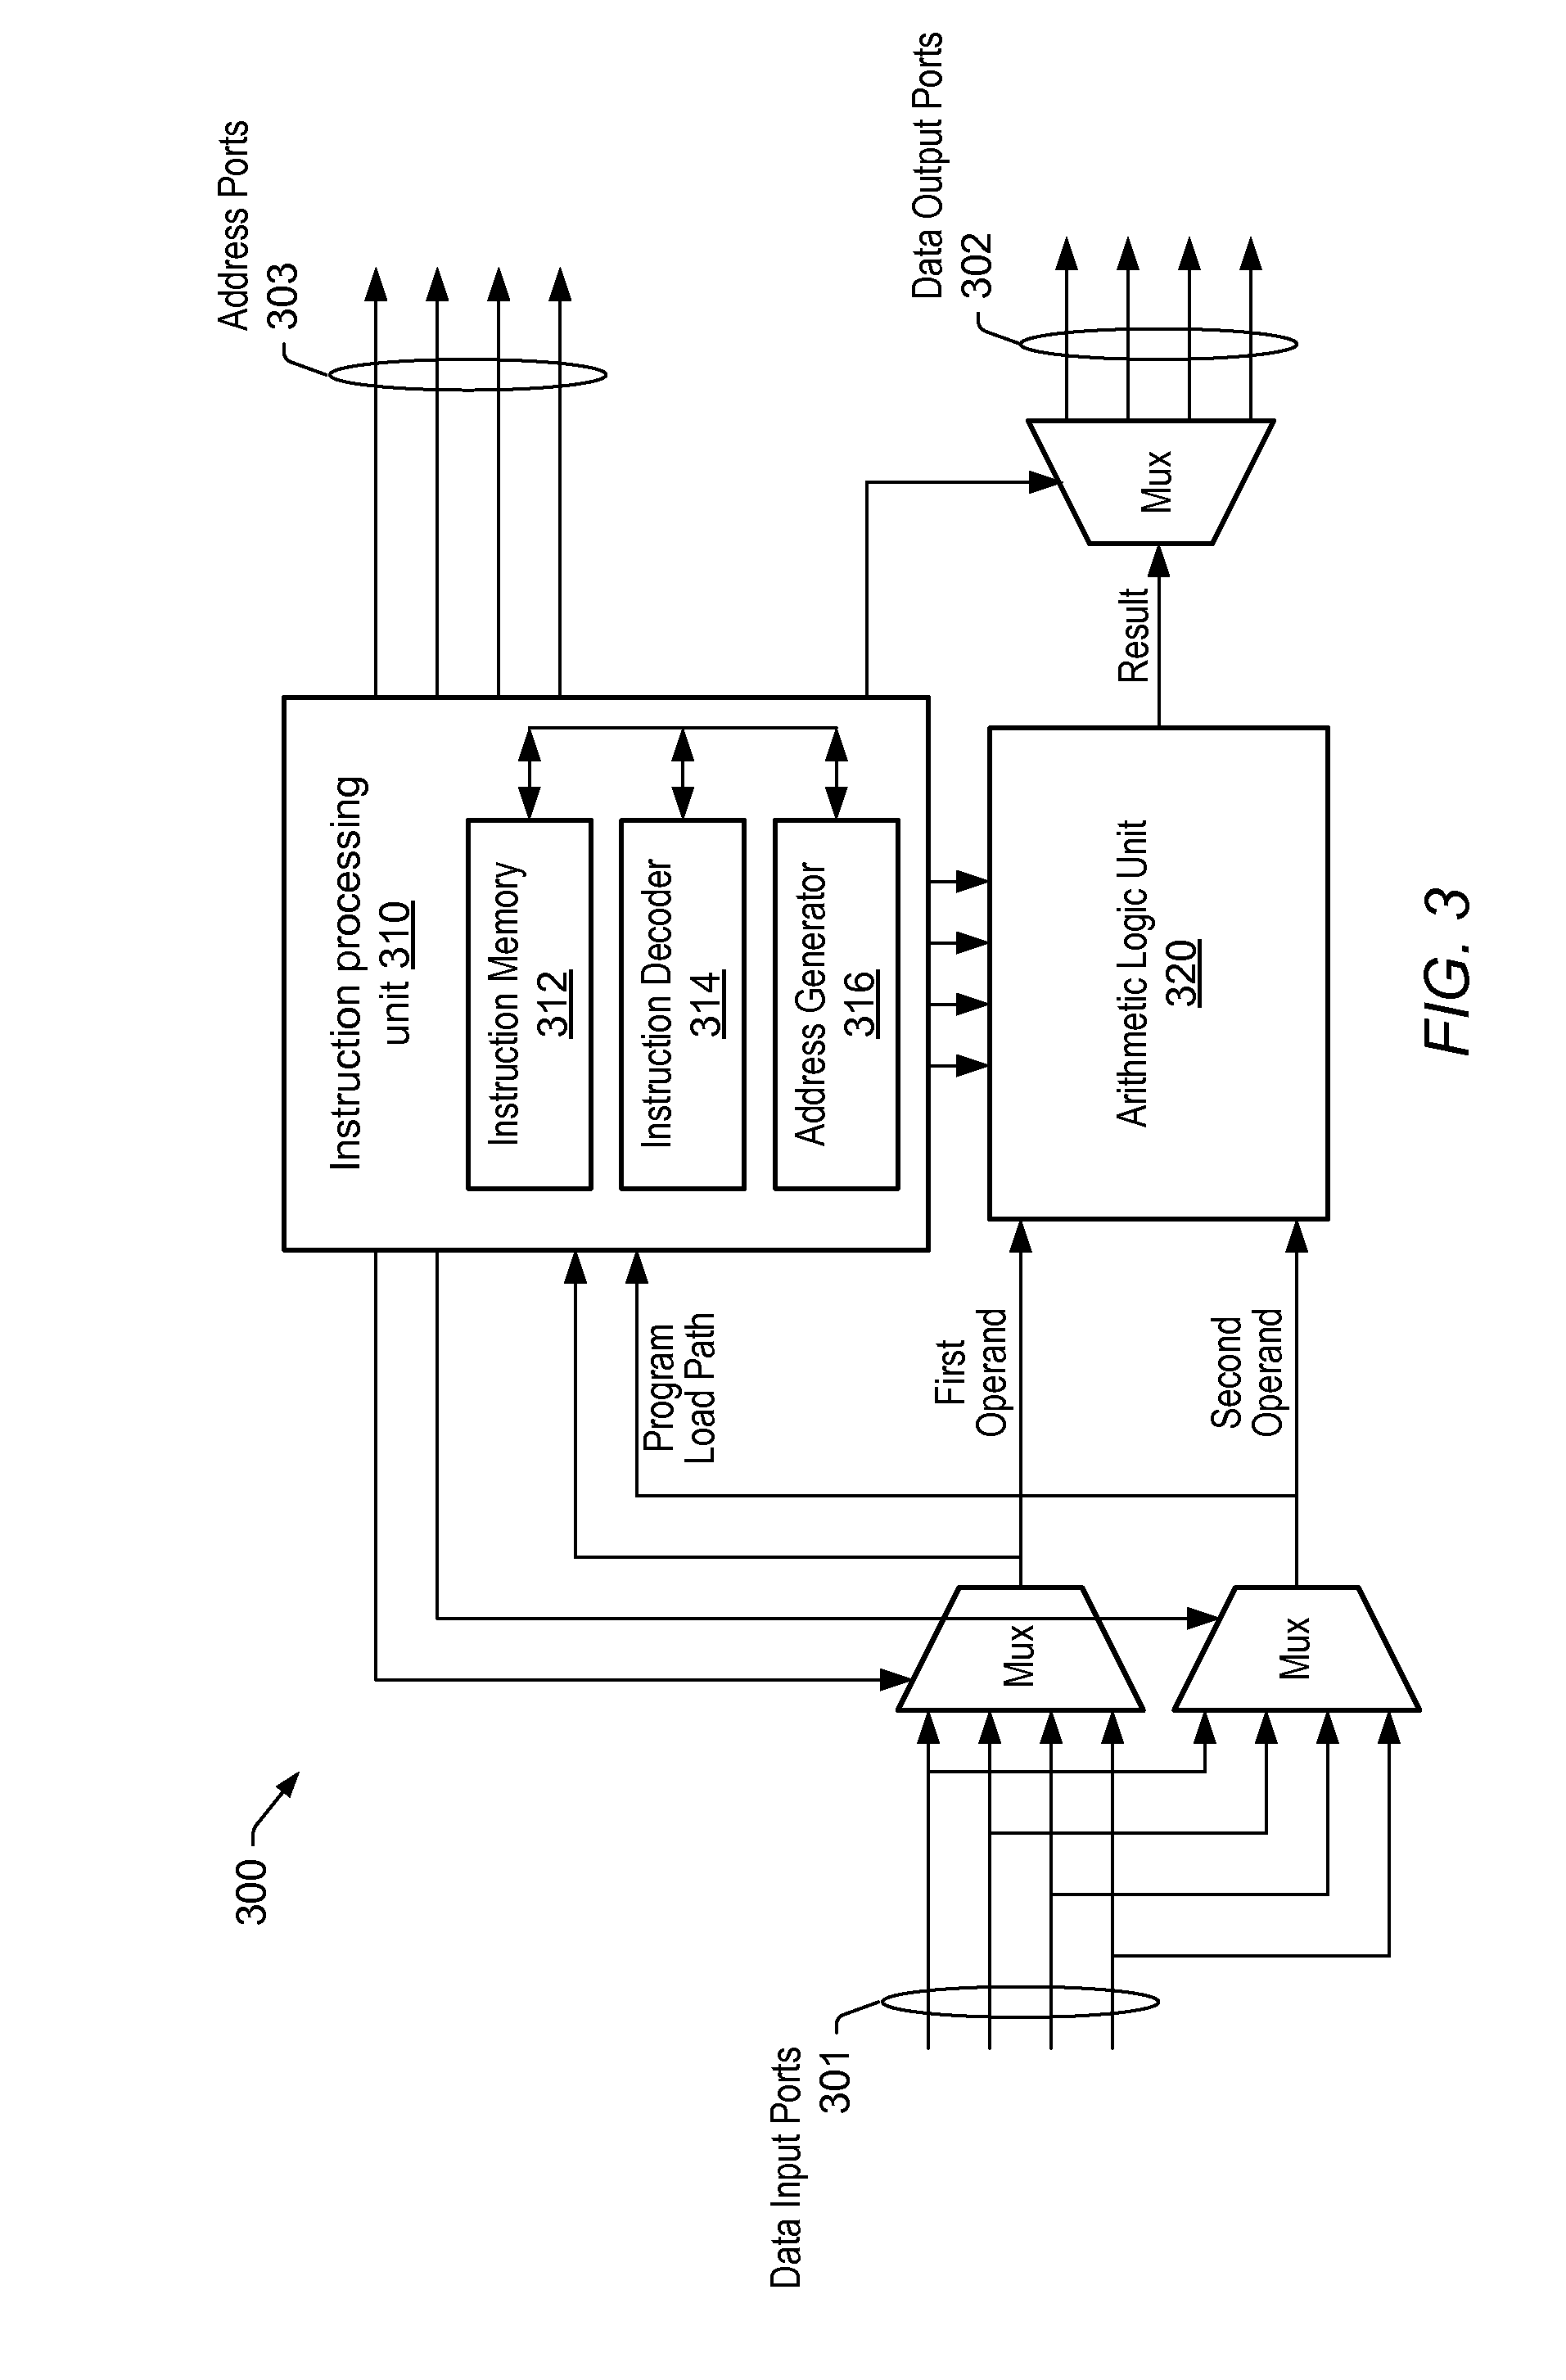 Processing system with interspersed processors and communication elements